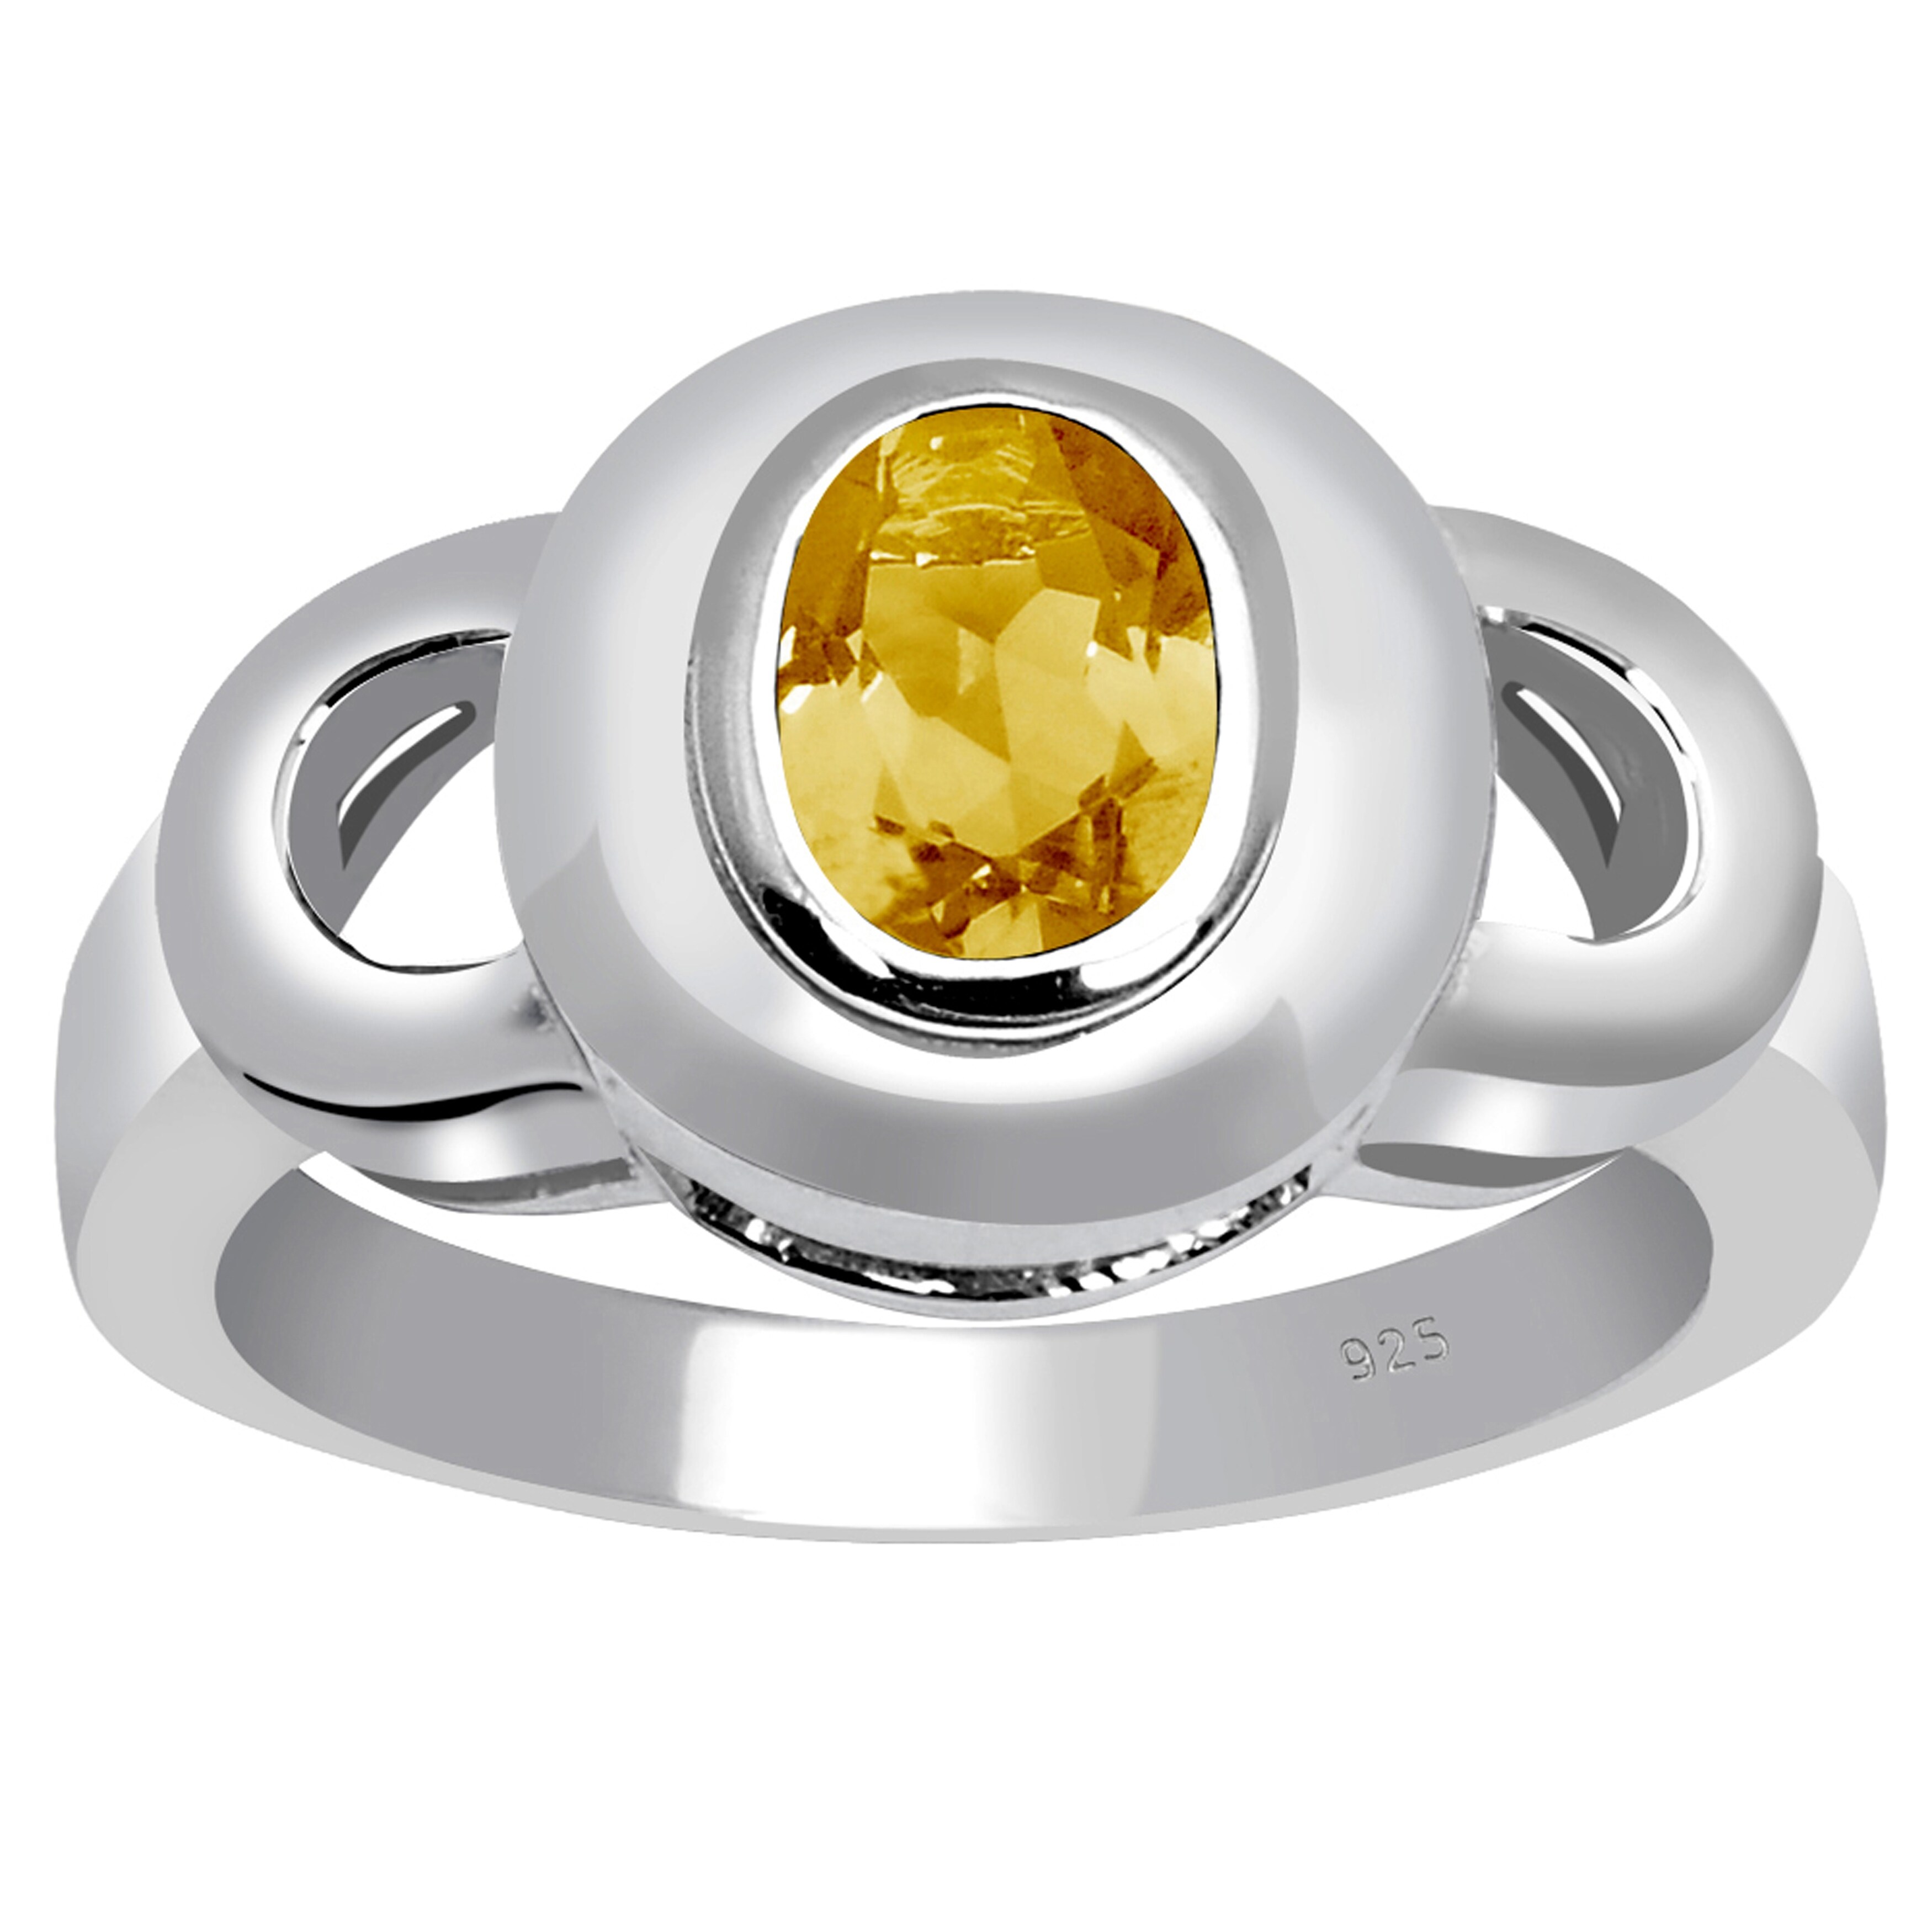 Citrine, Garnet, Amethyst, Topaz Sterling Silver Oval Promise Ring by Orchid Jewelry